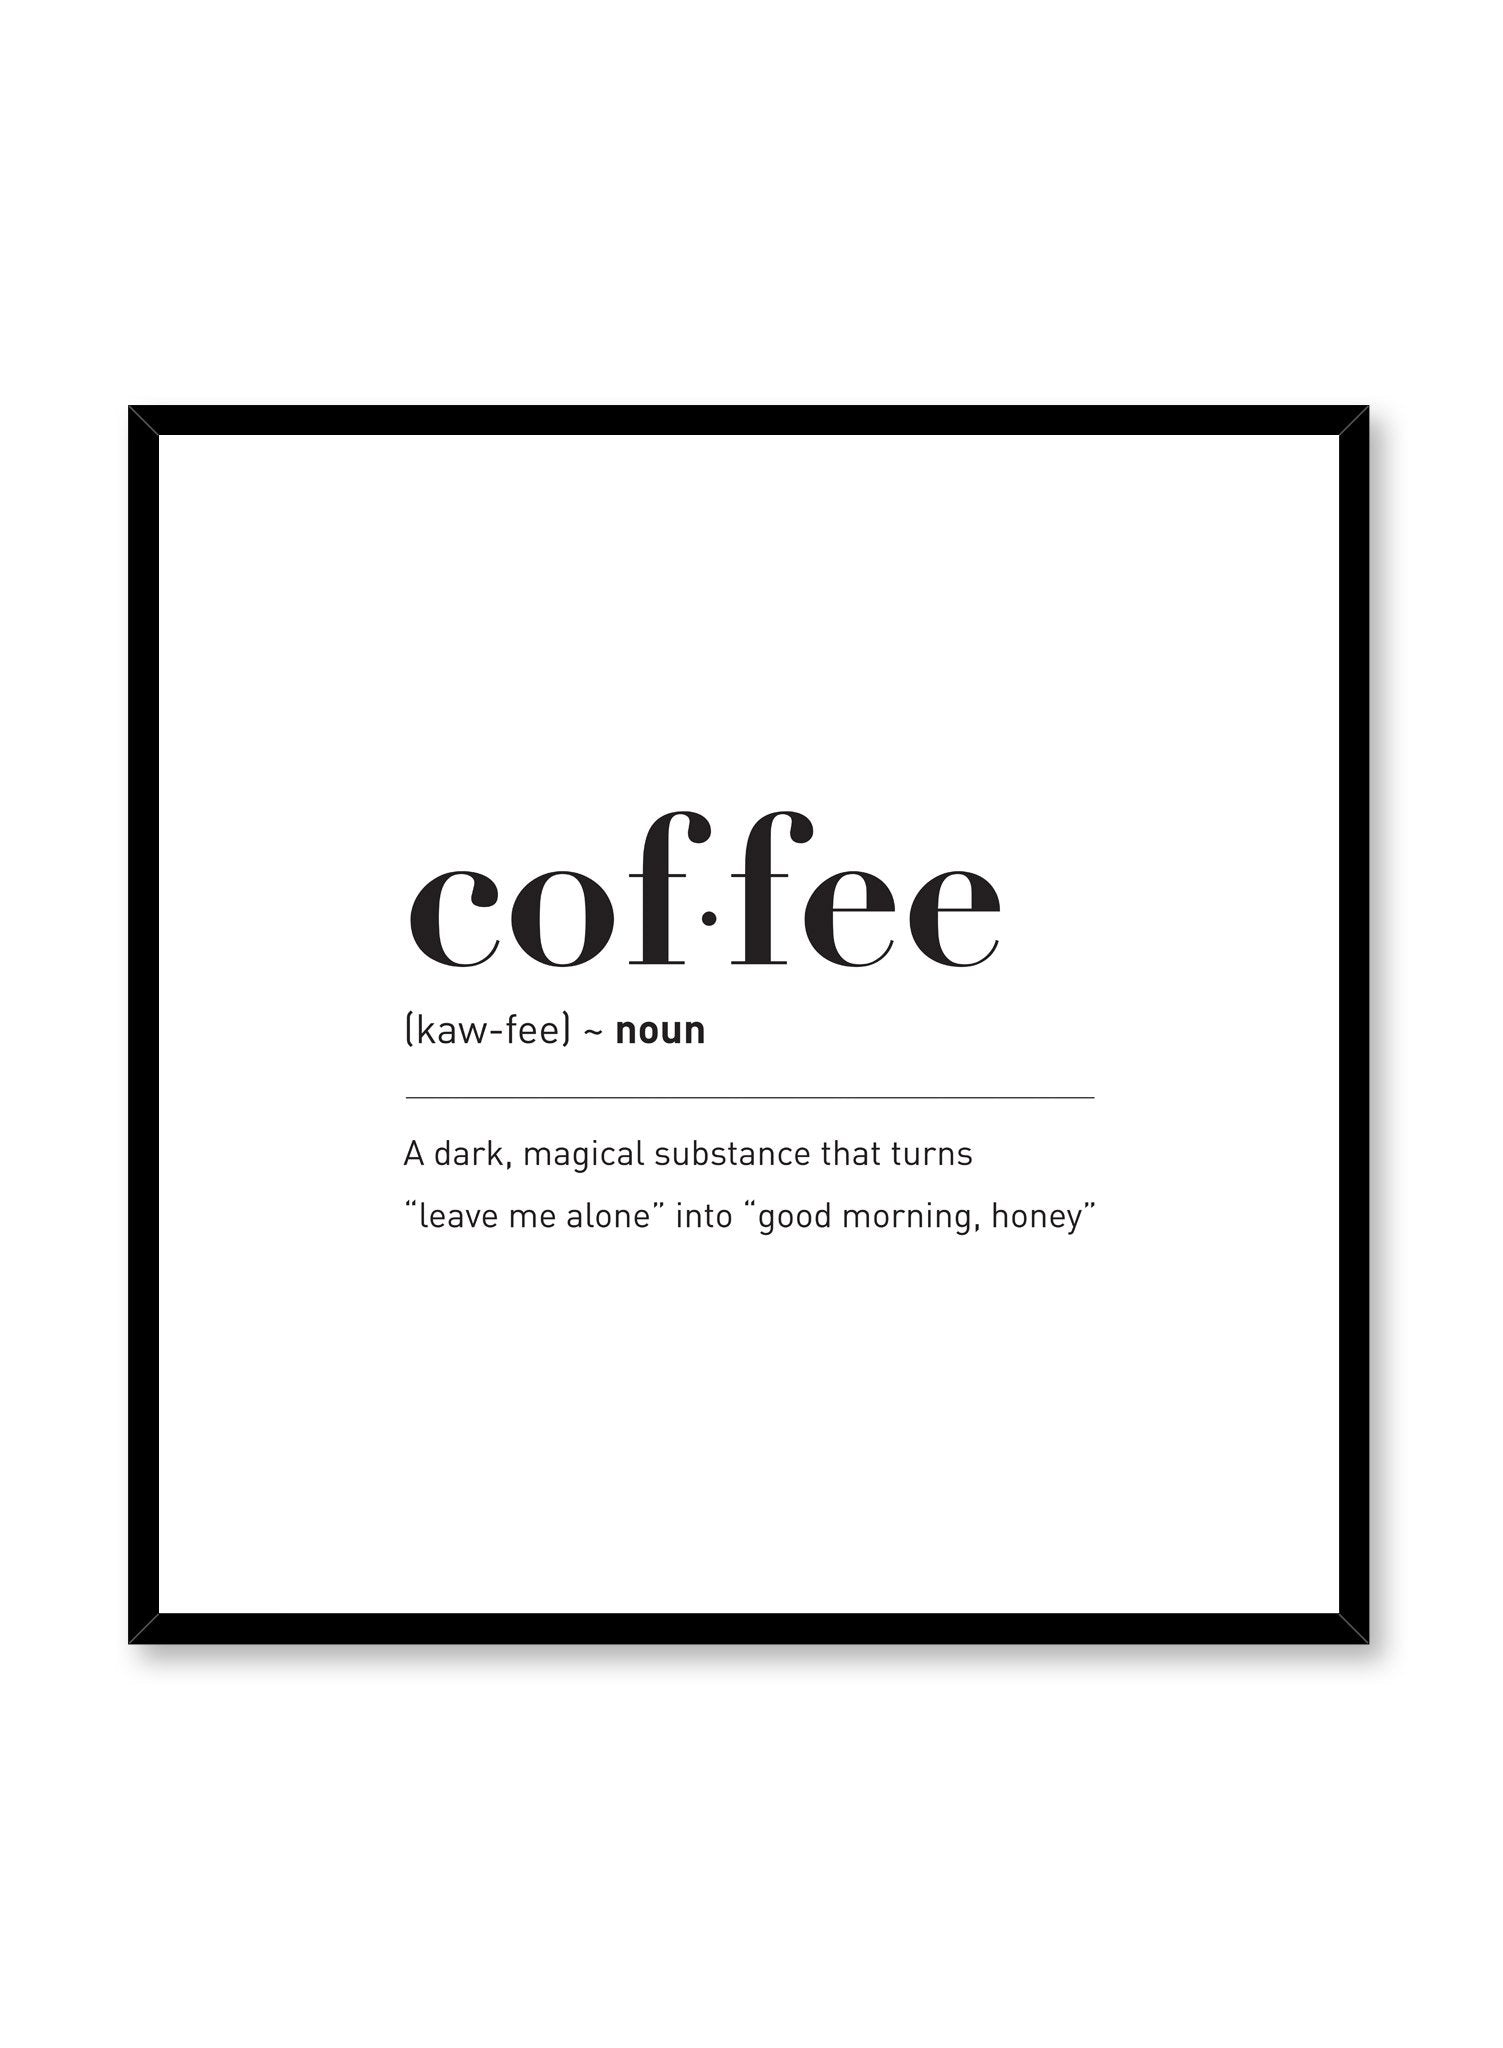 Minimalist poster by Opposite Wall with Coffee typography in square format